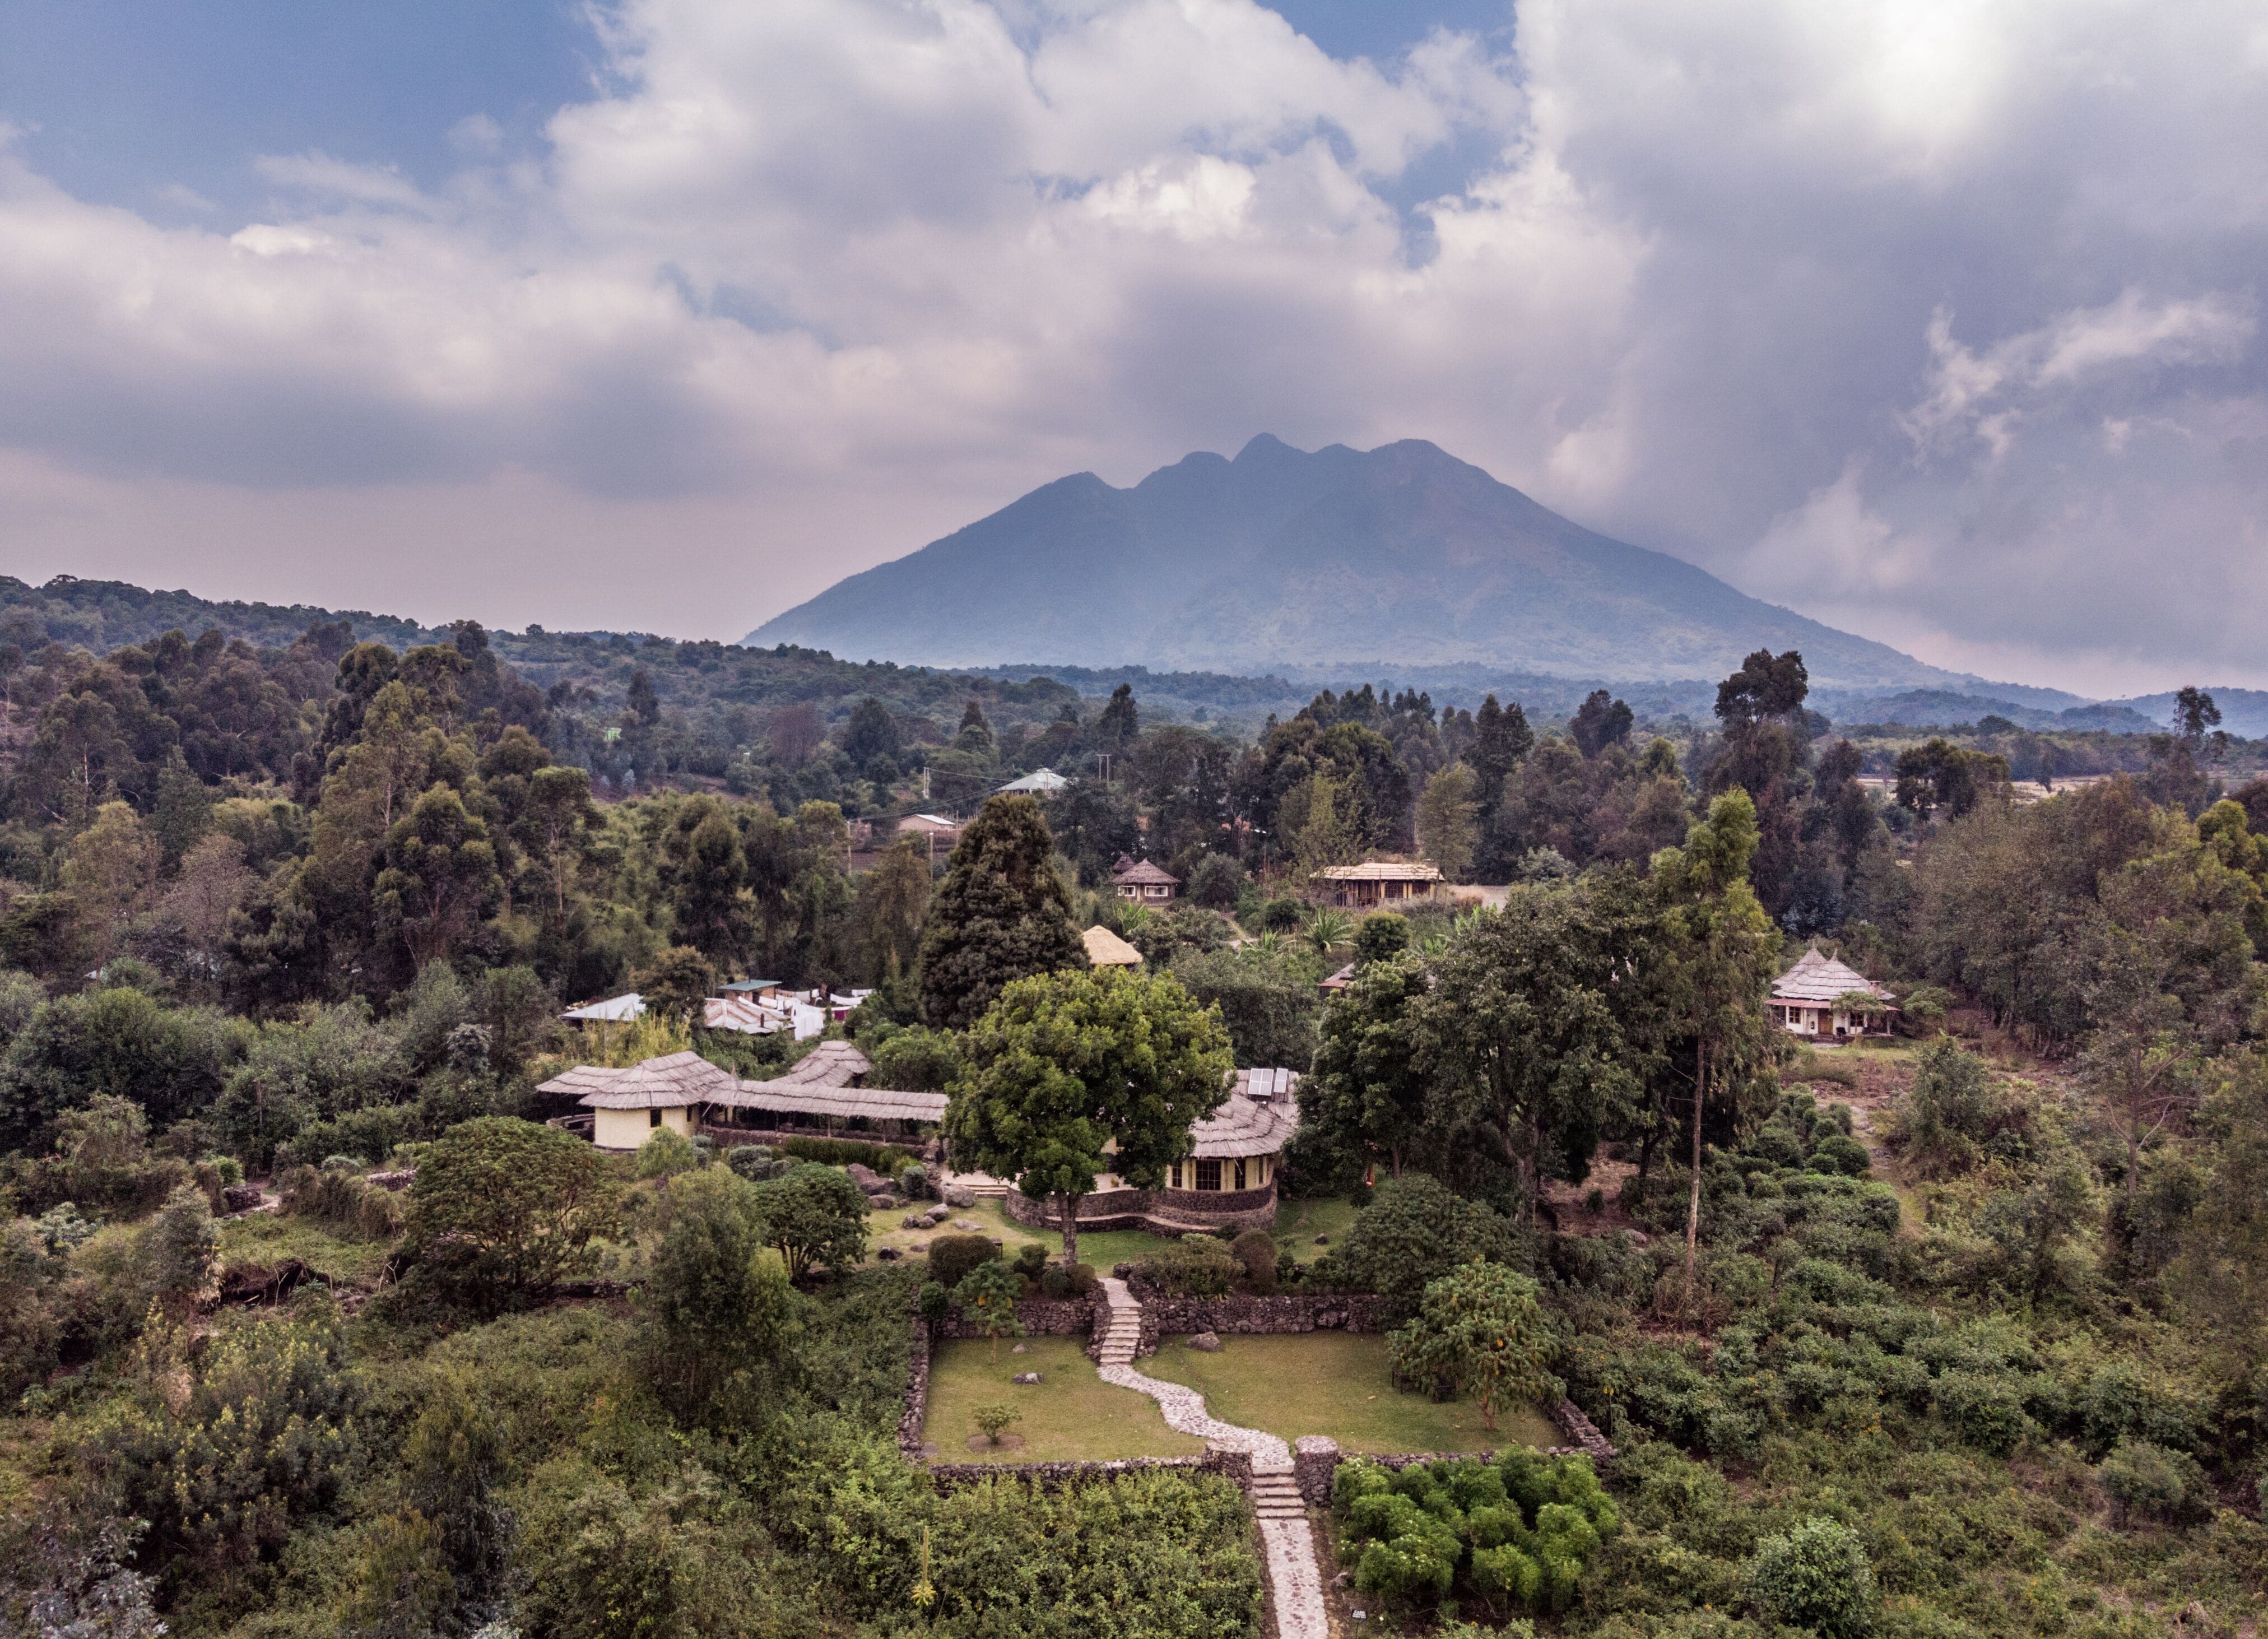 Volcanoes Safaris lodges have been nominated for the Travel and Leisure World’s Best Awards 2022!